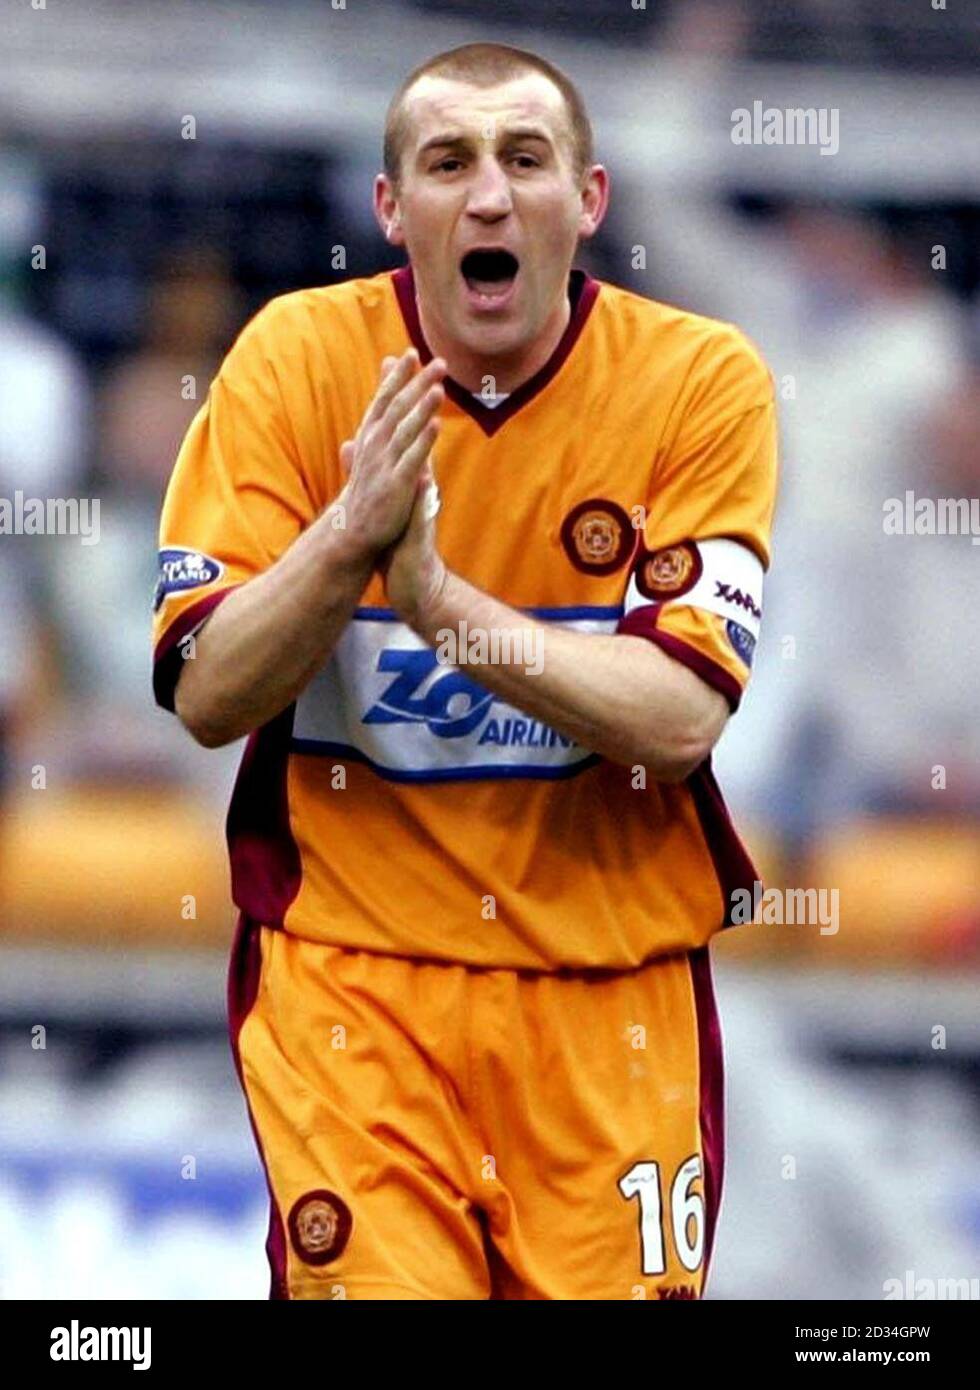 Motherwell's James Hamilton celebrates his goal against Celtic during the Bank of Scotland Premier League match at Fir Park, Motherwell, Sunday January 22, 2006. PRESS ASSOCIATION Photo. Photo credit should read: Danny Lawson/PA. ***EDITORIAL USE OINLY*** Stock Photo